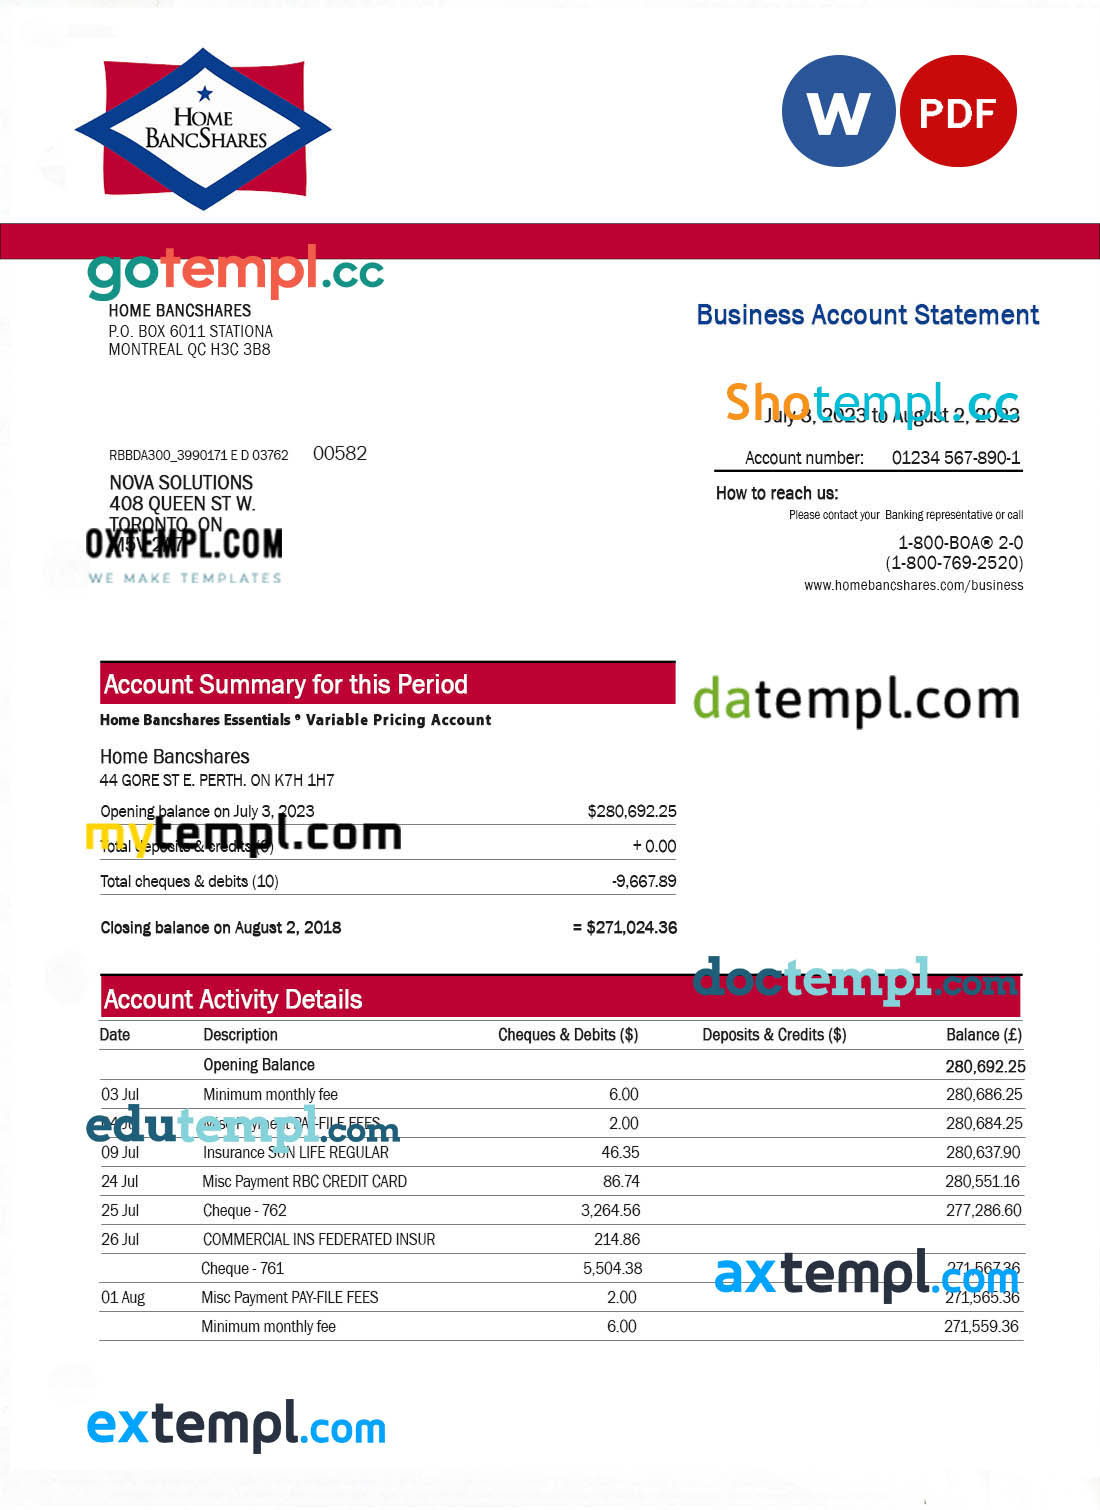 Home Bancshares Bank firm account statement Word and PDF template